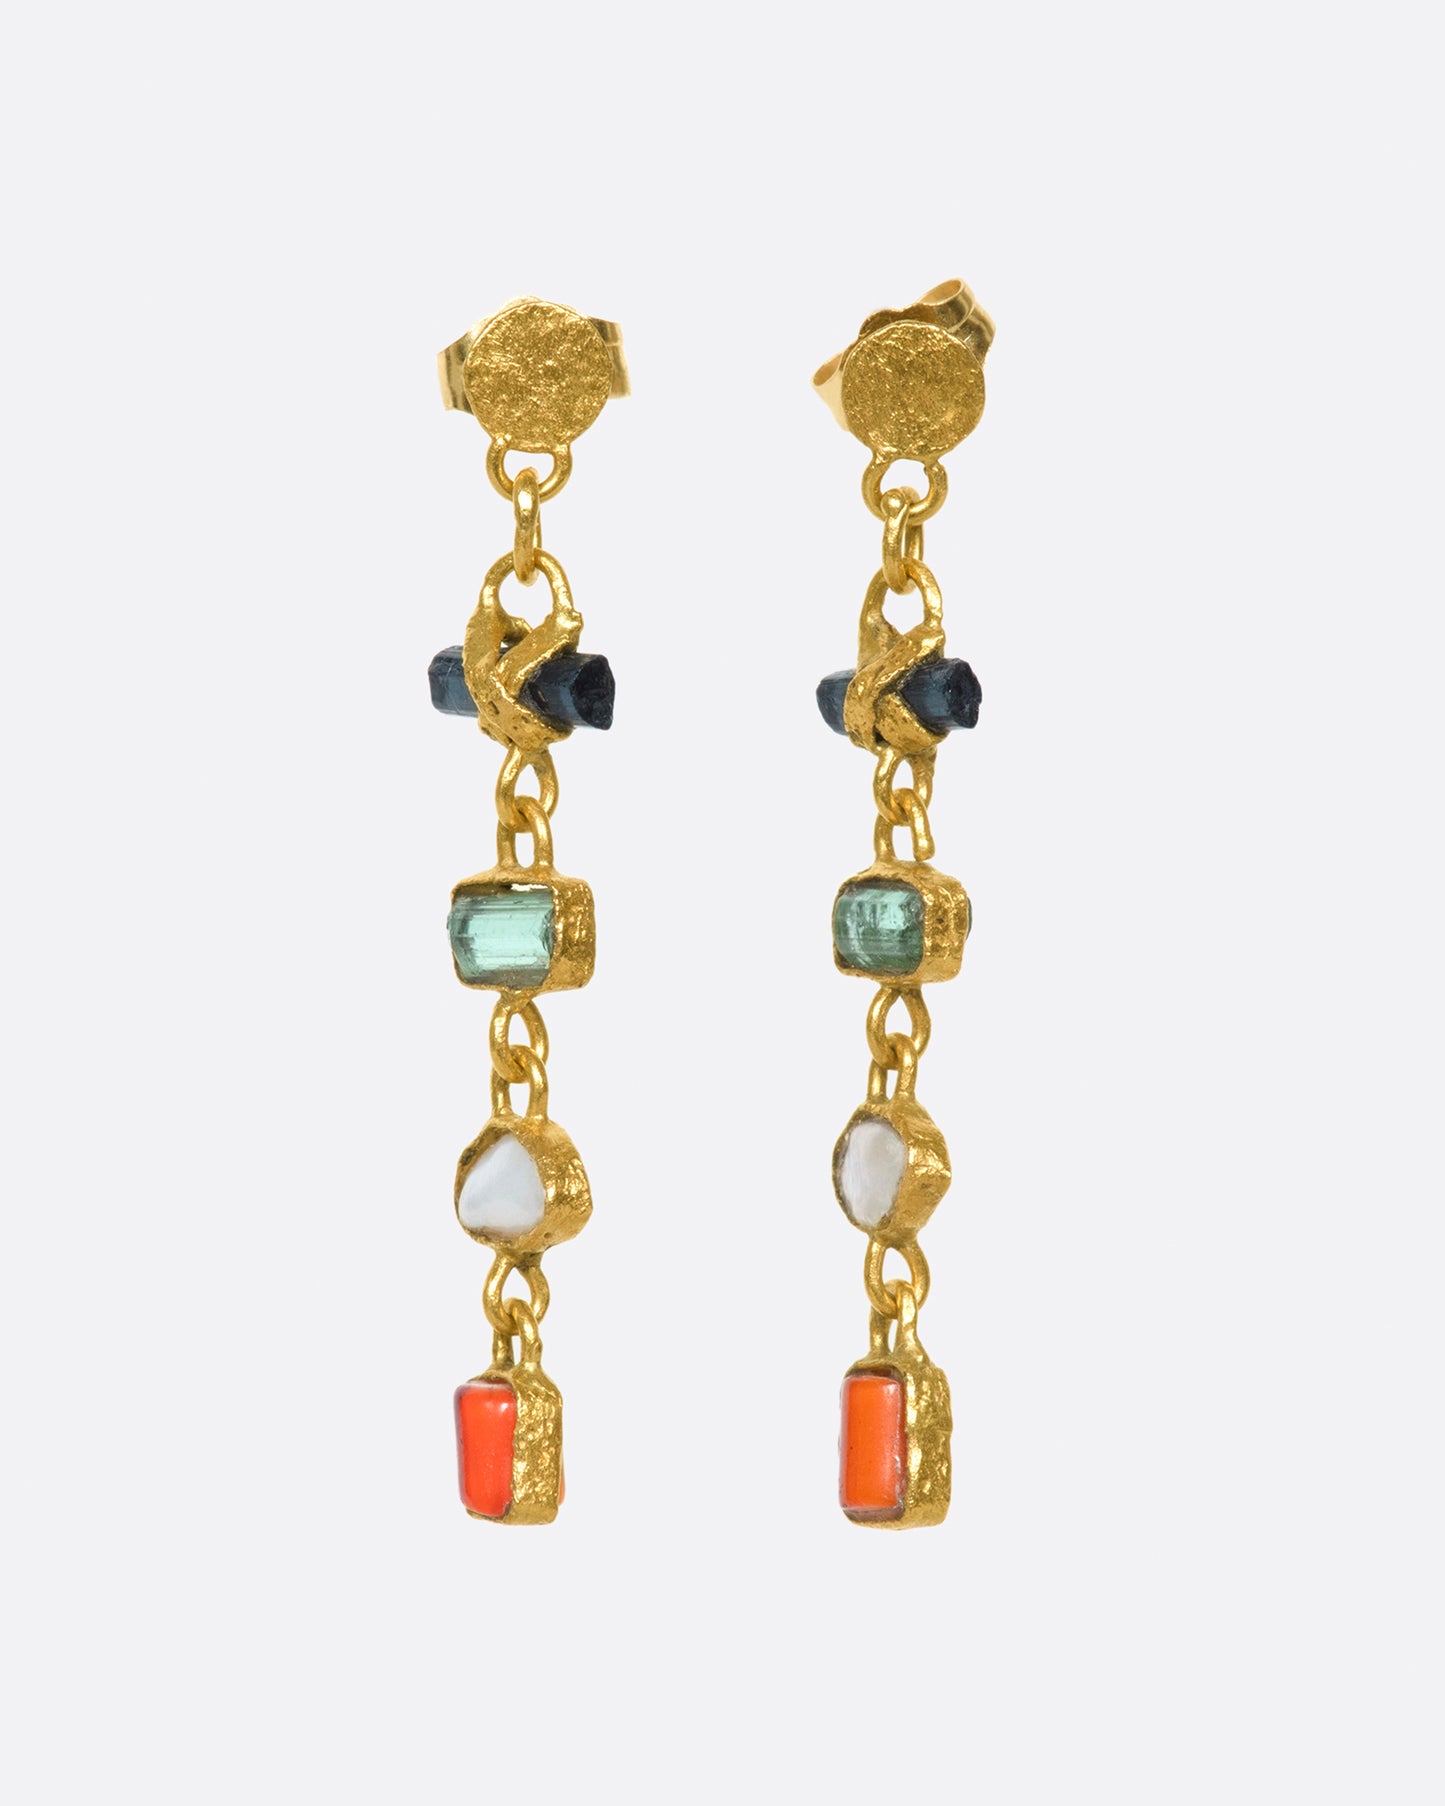 Made from some of Lou Zeldis' favorite findings, these multicolor earrings are equally cool dressed up or down.